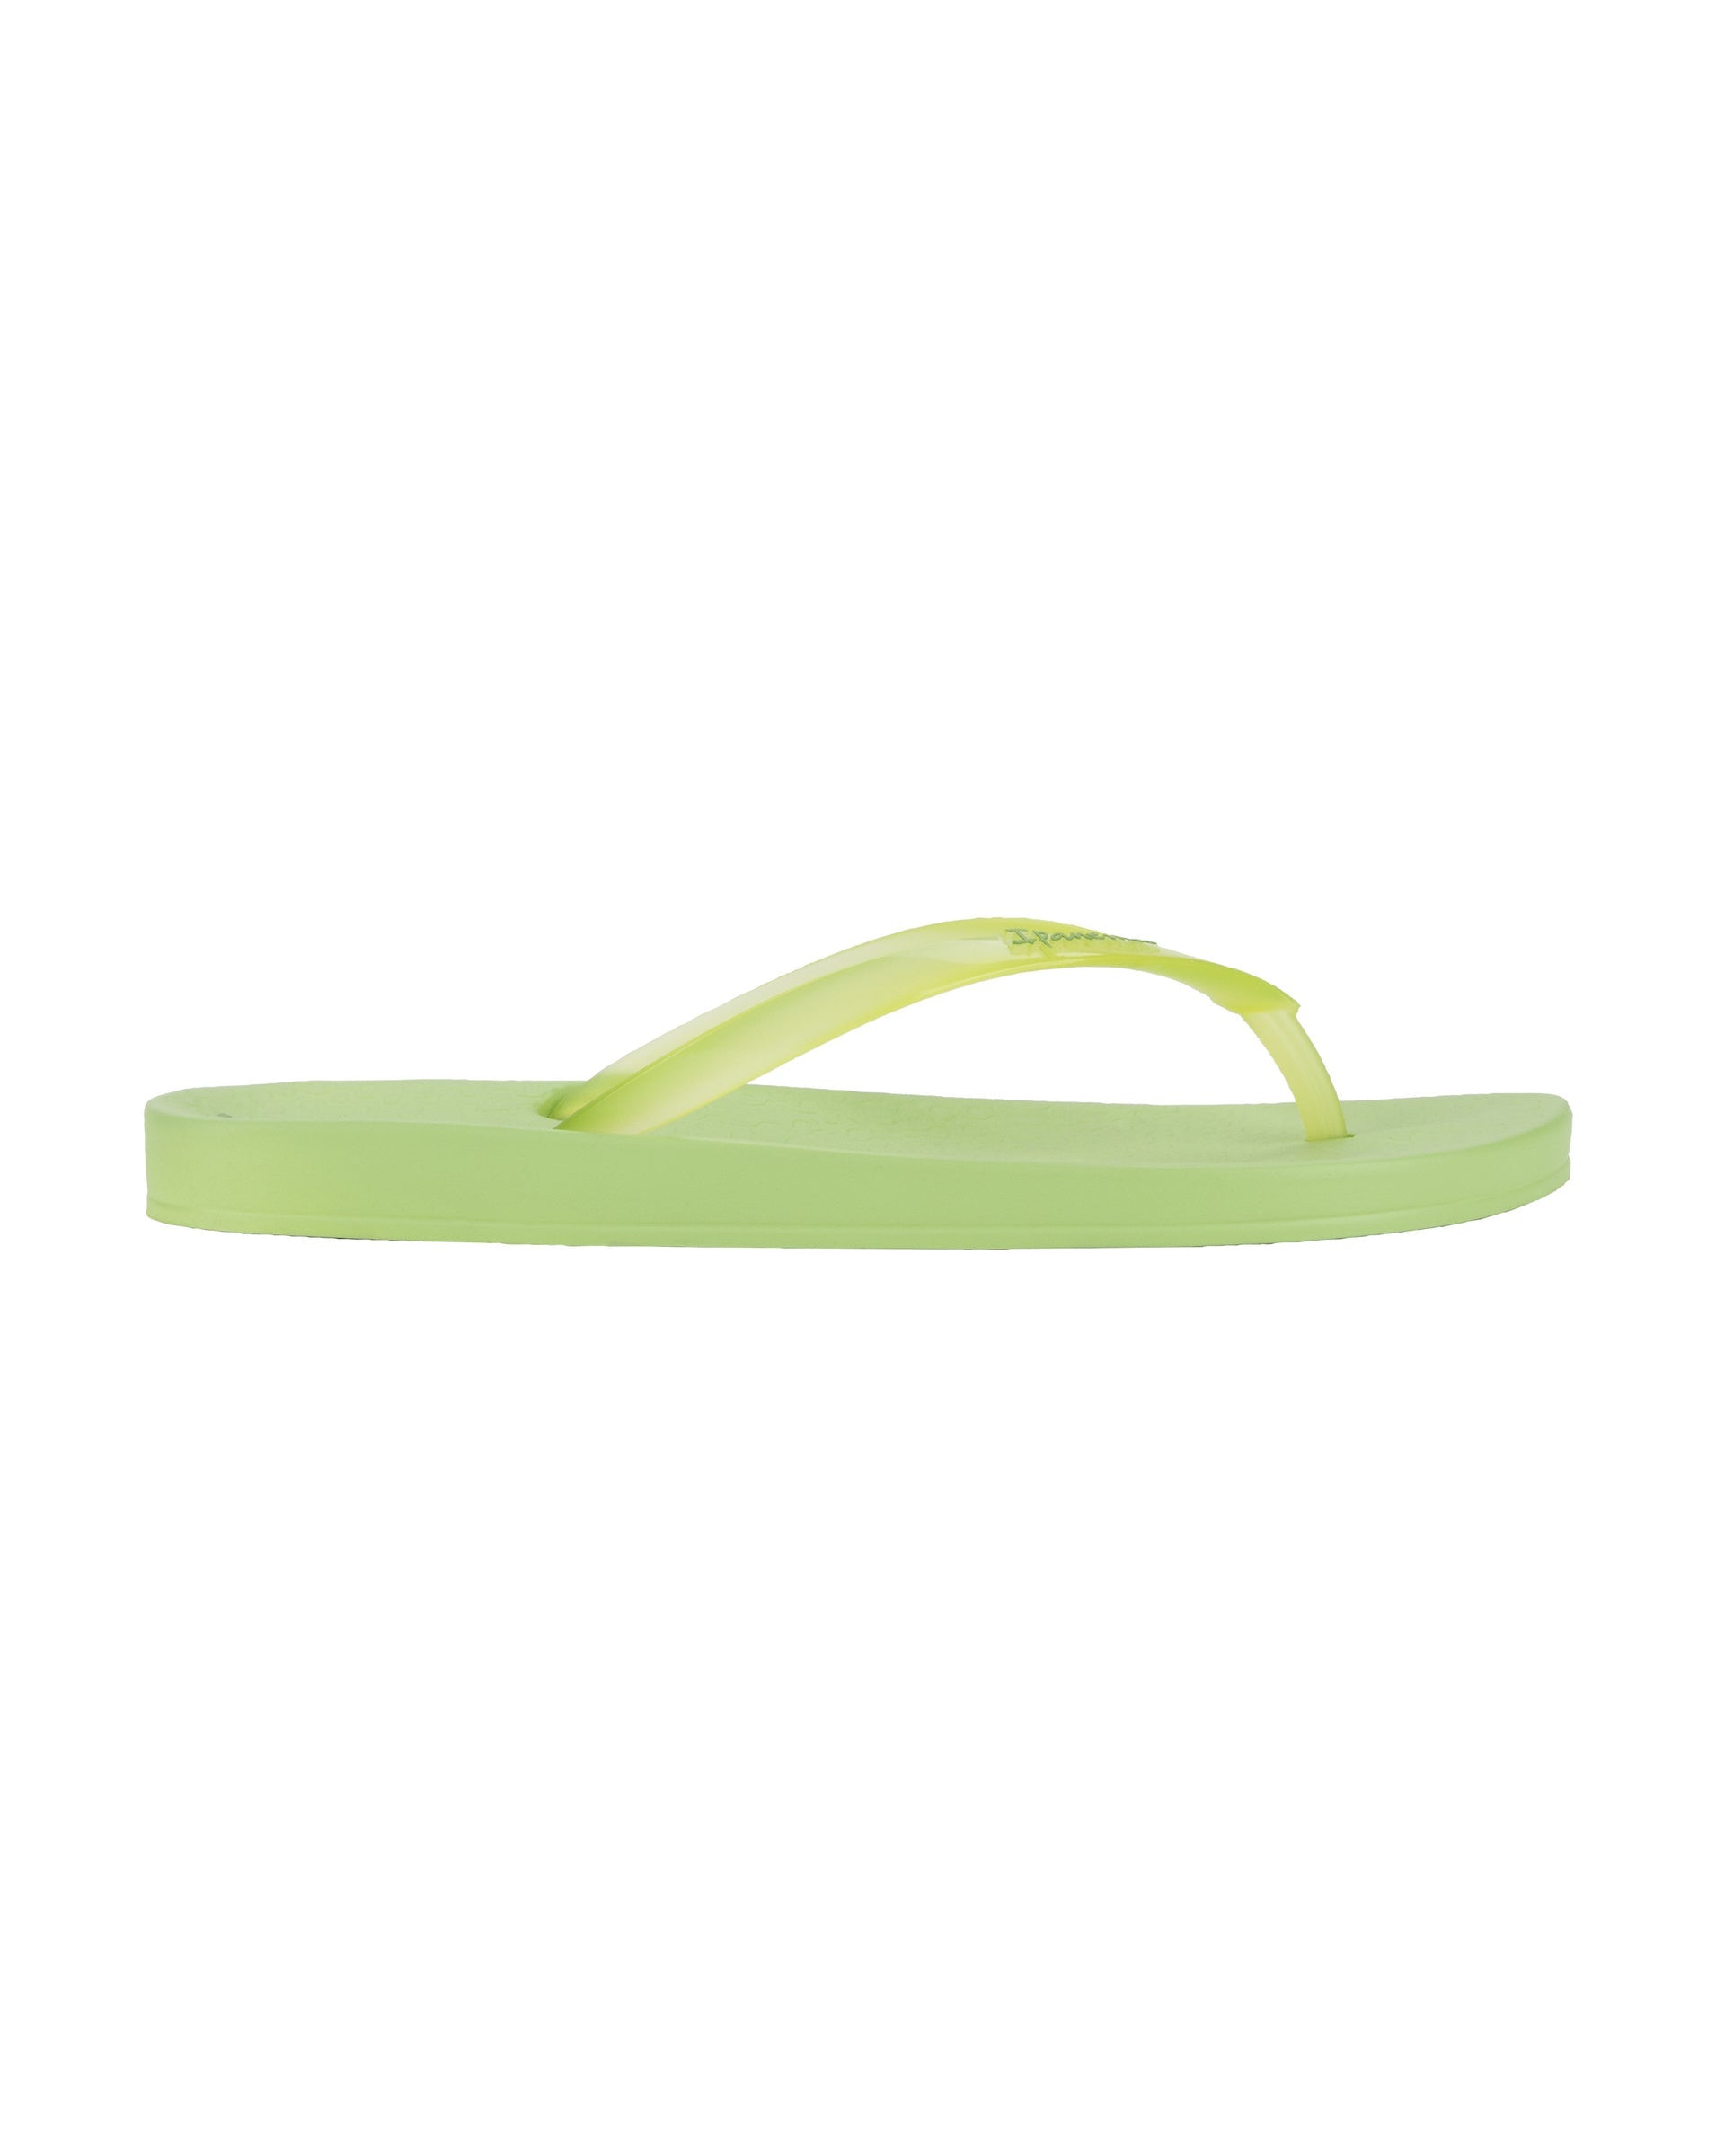 Outer side view of a green Ipanema Ana Connect women's flip flop with a clear green strap.